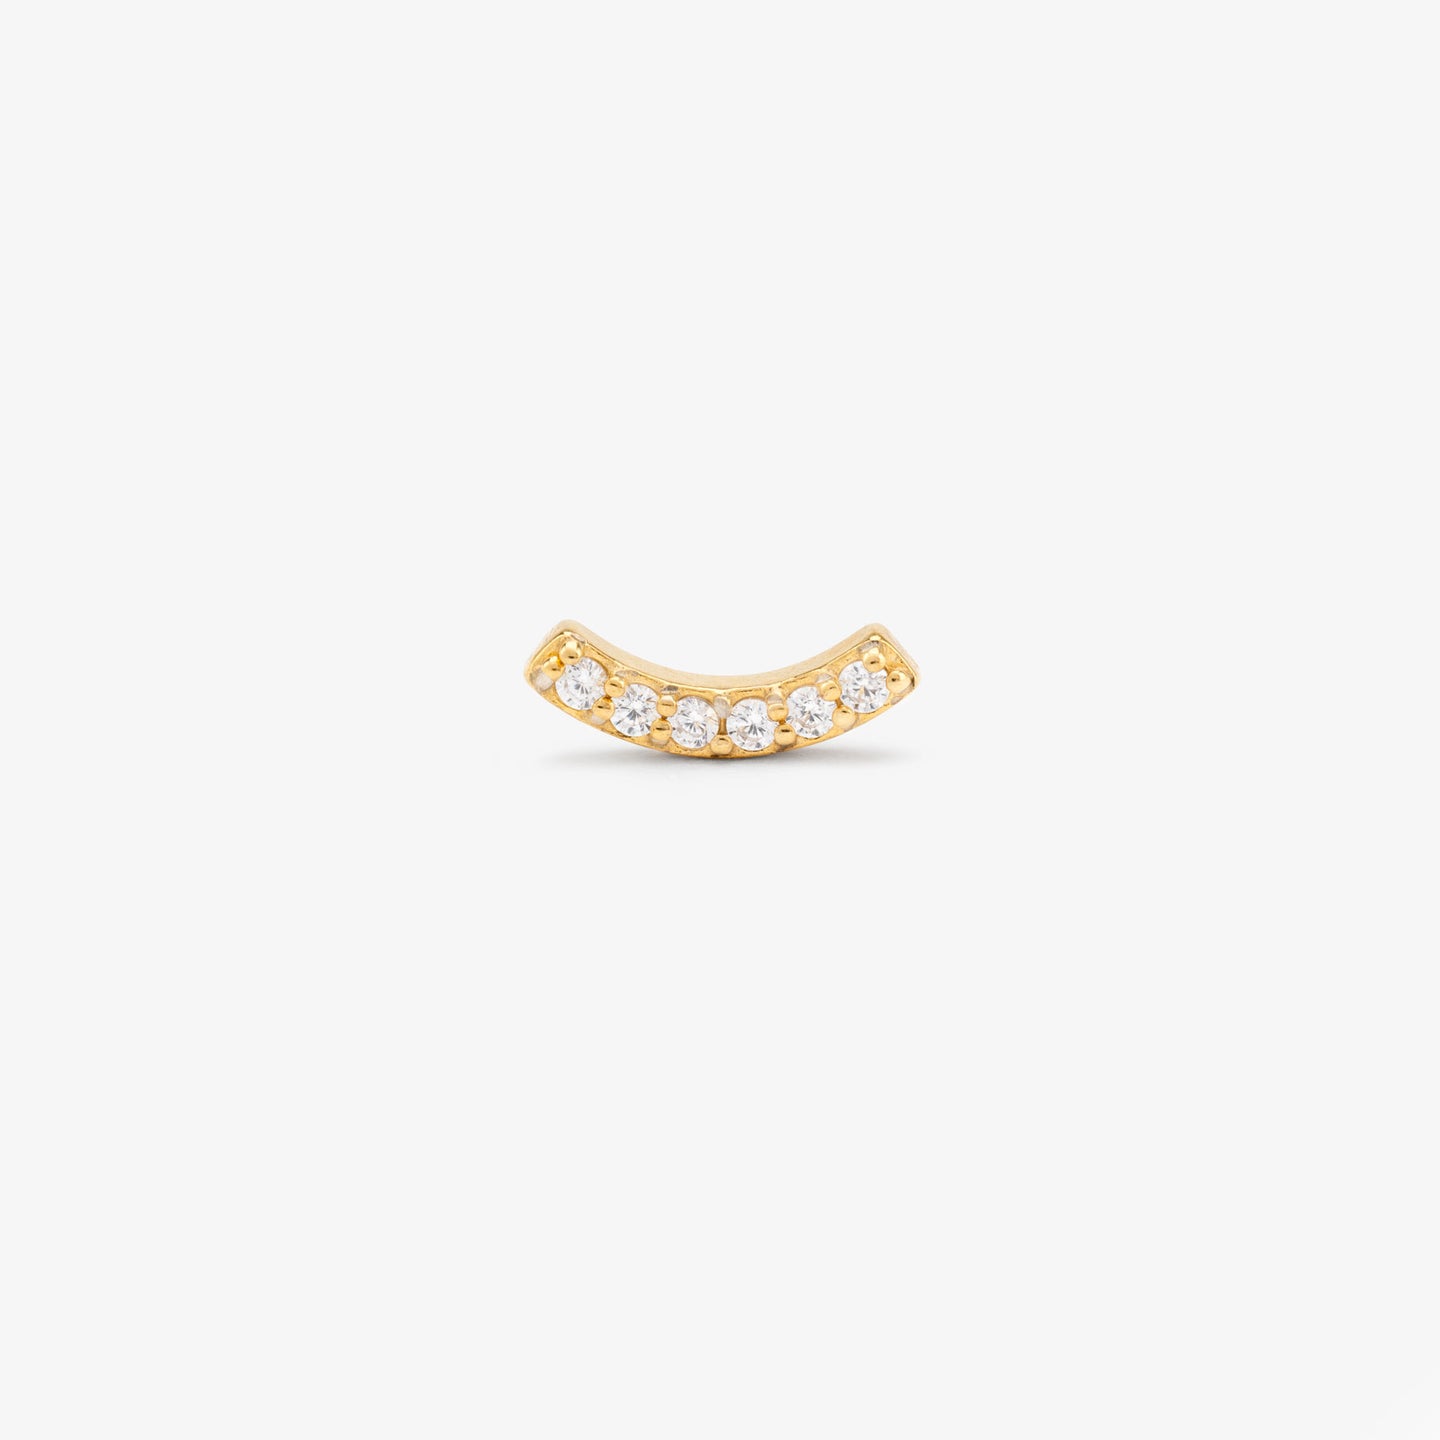 This is a 14k gold pavé stud in the shape of a curved bar color:null|gold/clear